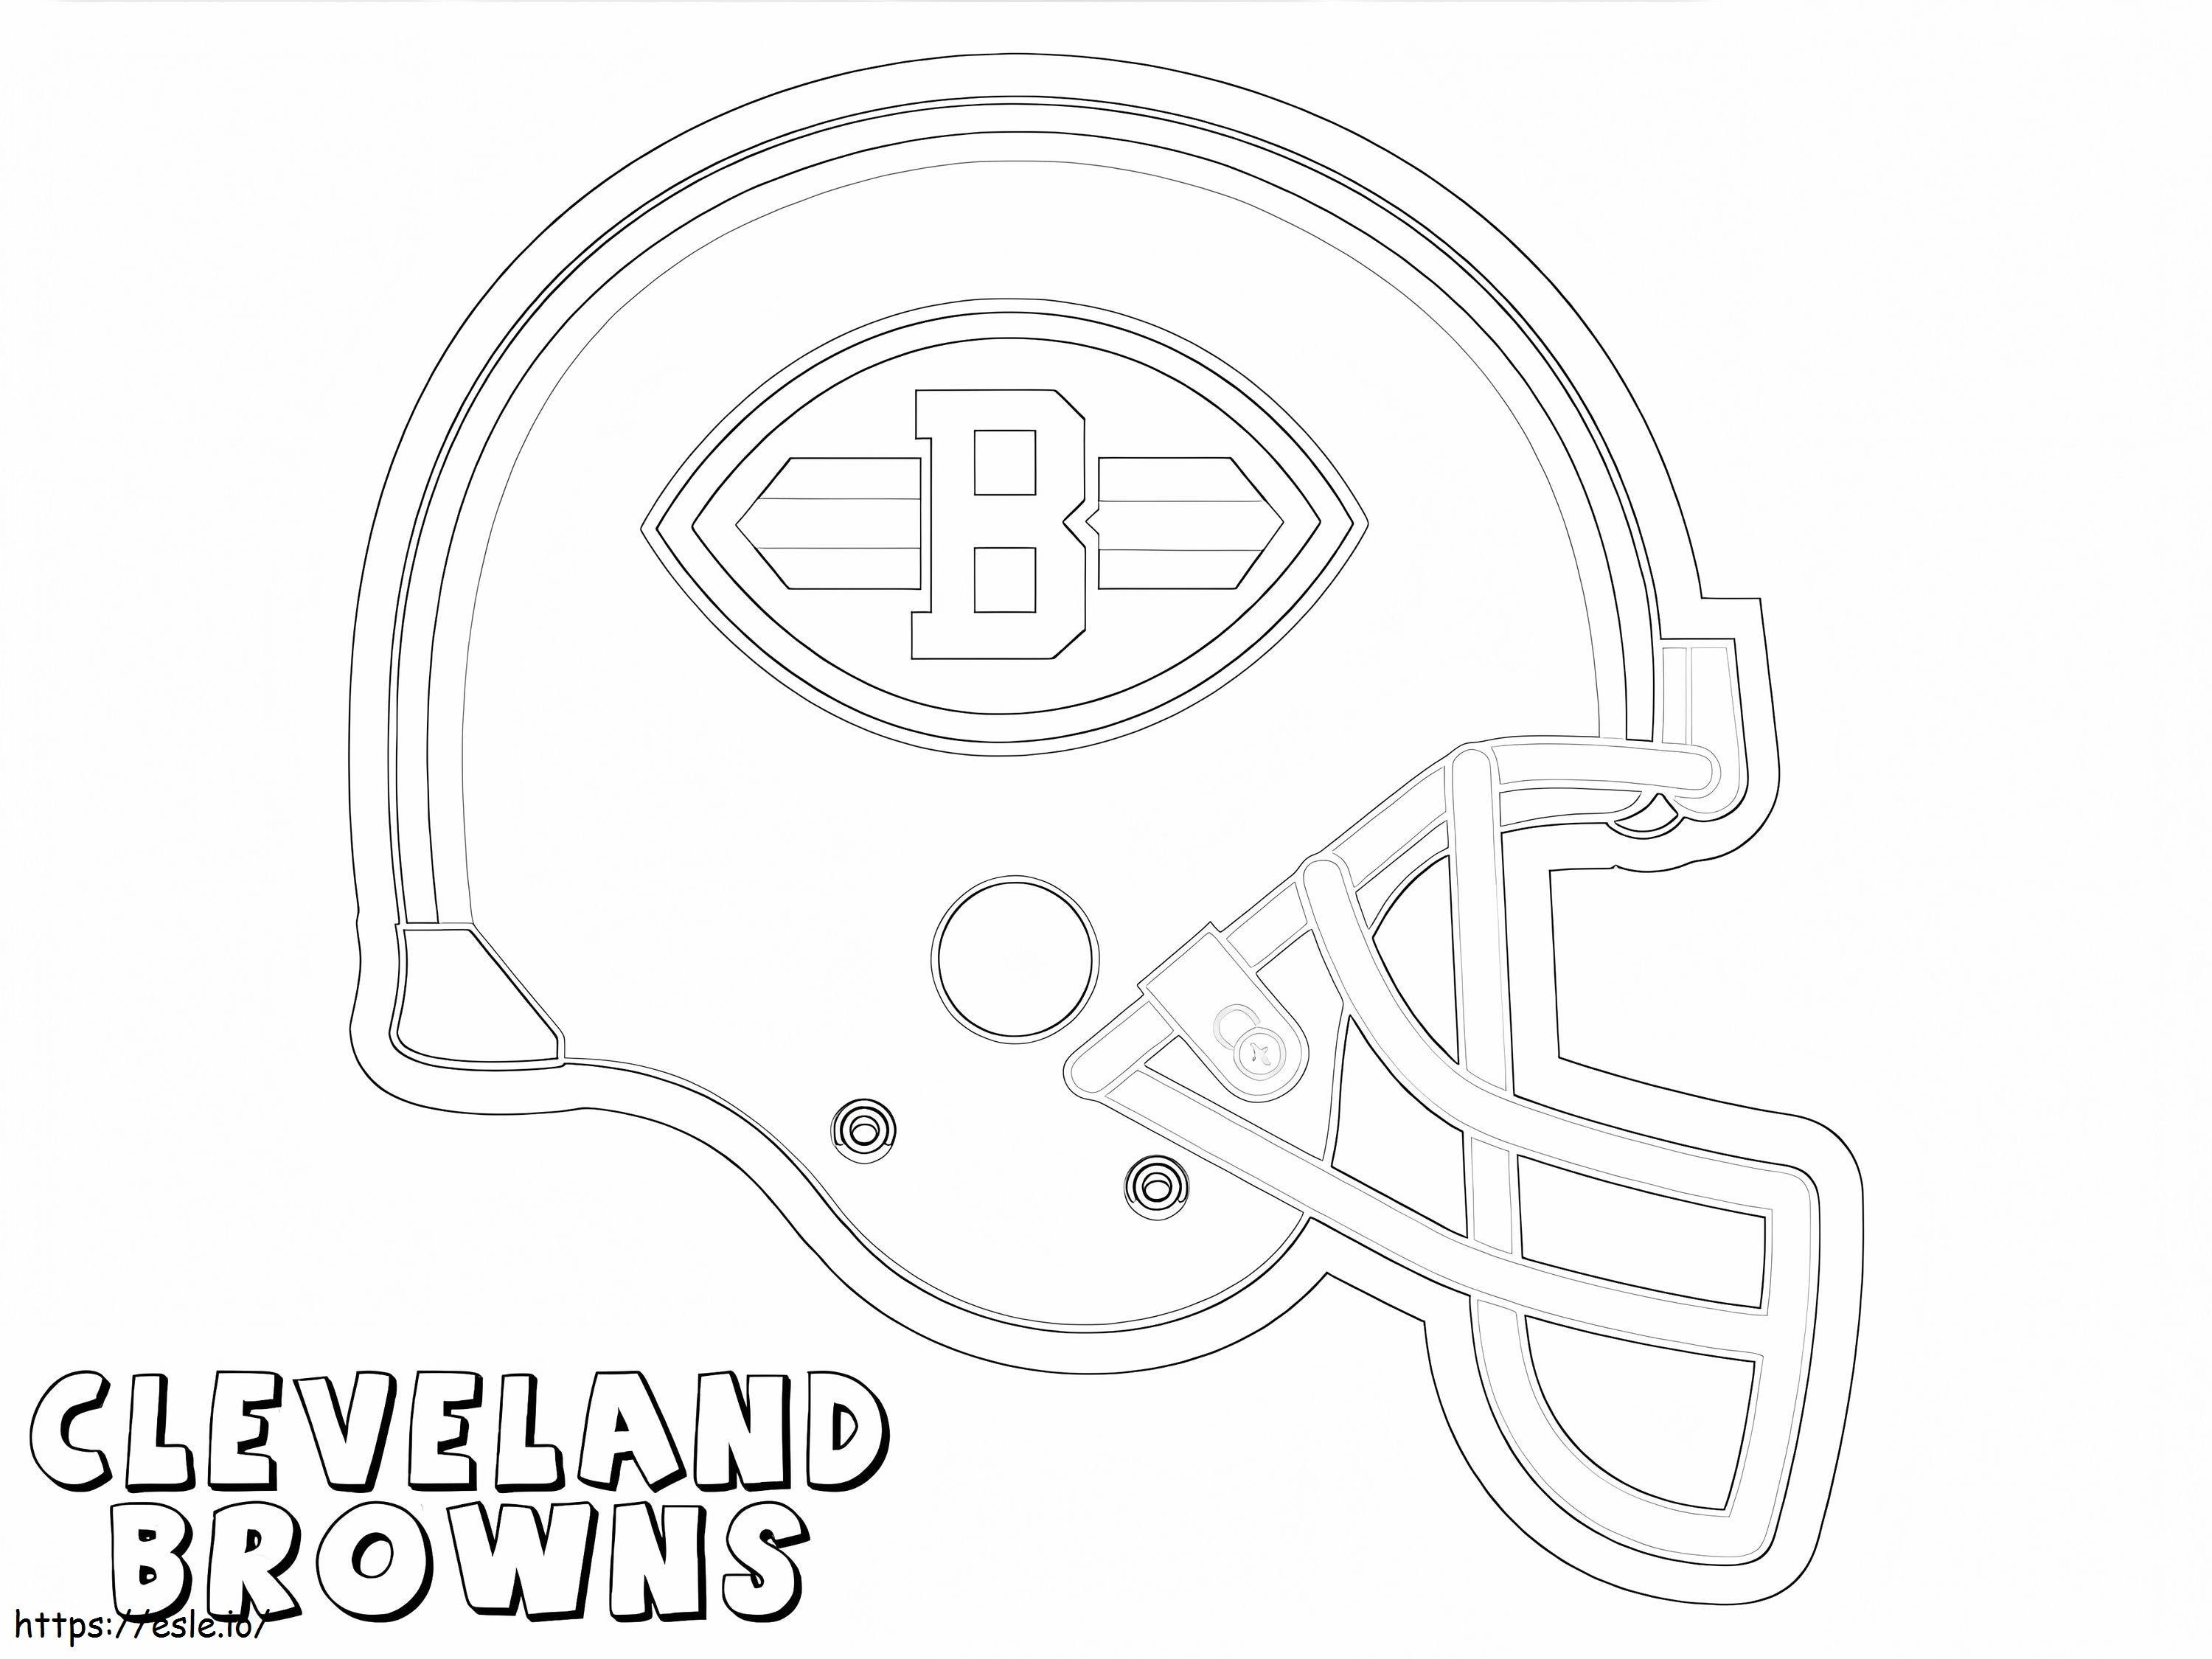 Cleveland Browns 3 coloring page